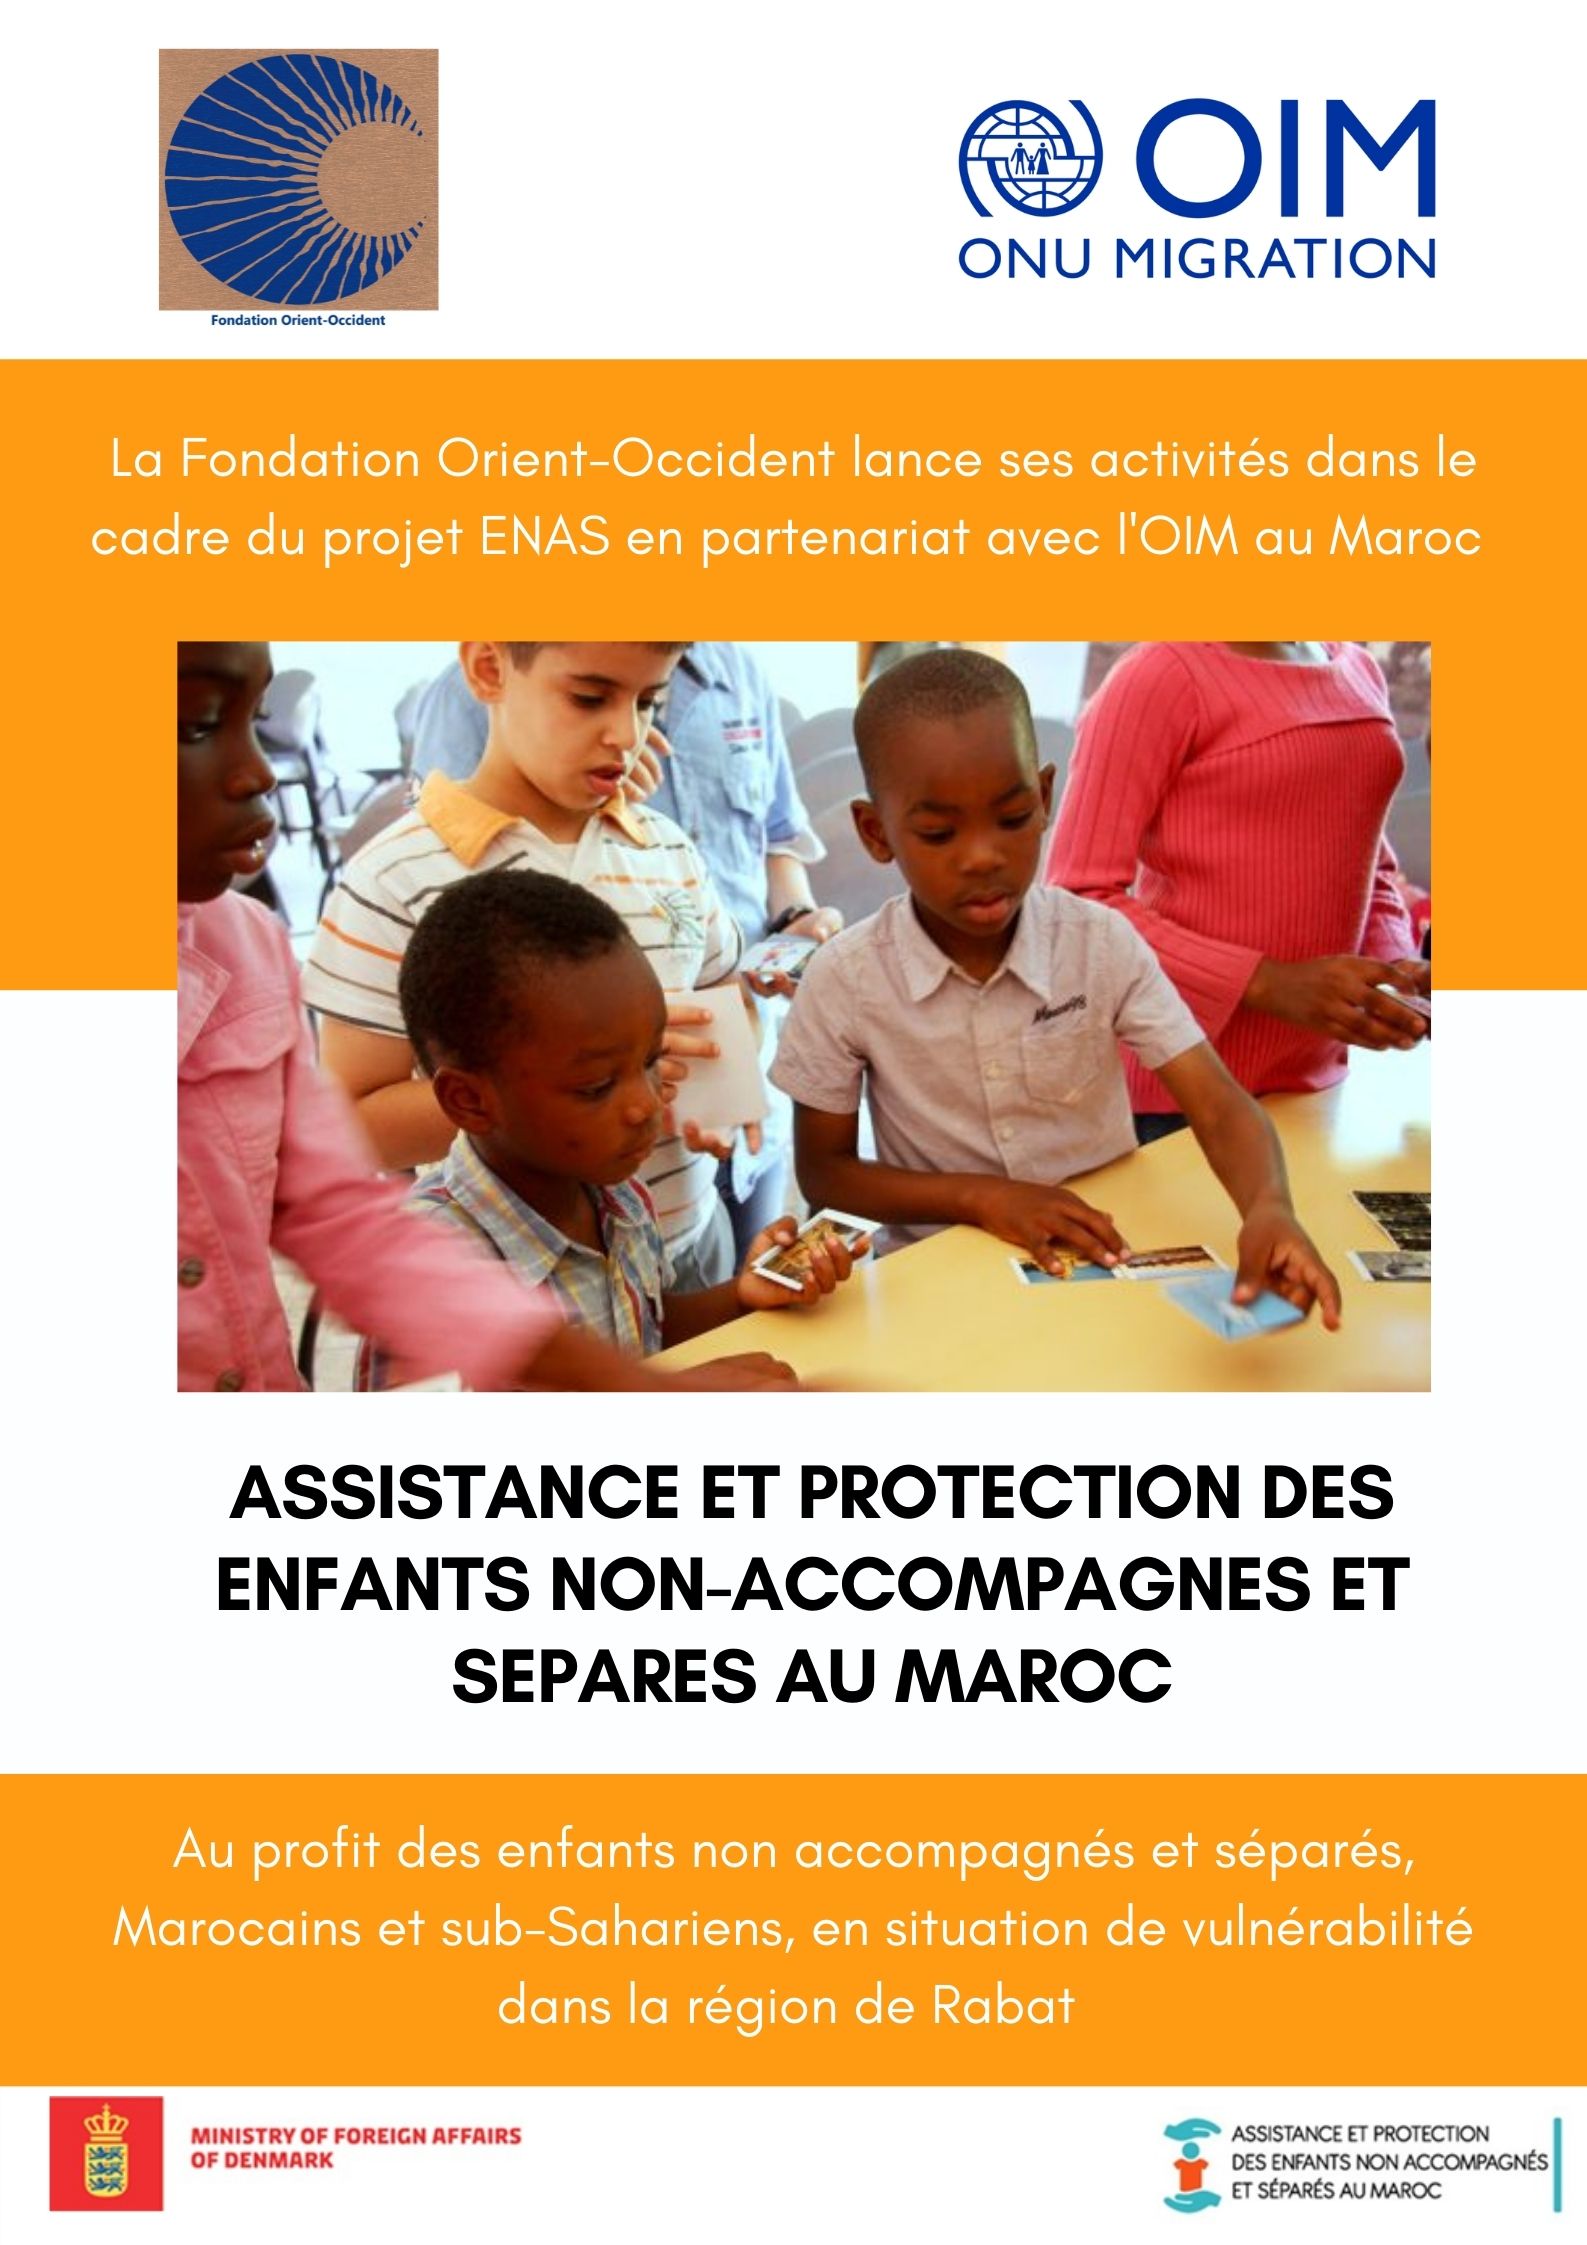 New partnership between IOM and the Fondation Orient-Occident, on a project centering on the assistance and accompaniment of vulnerable minors